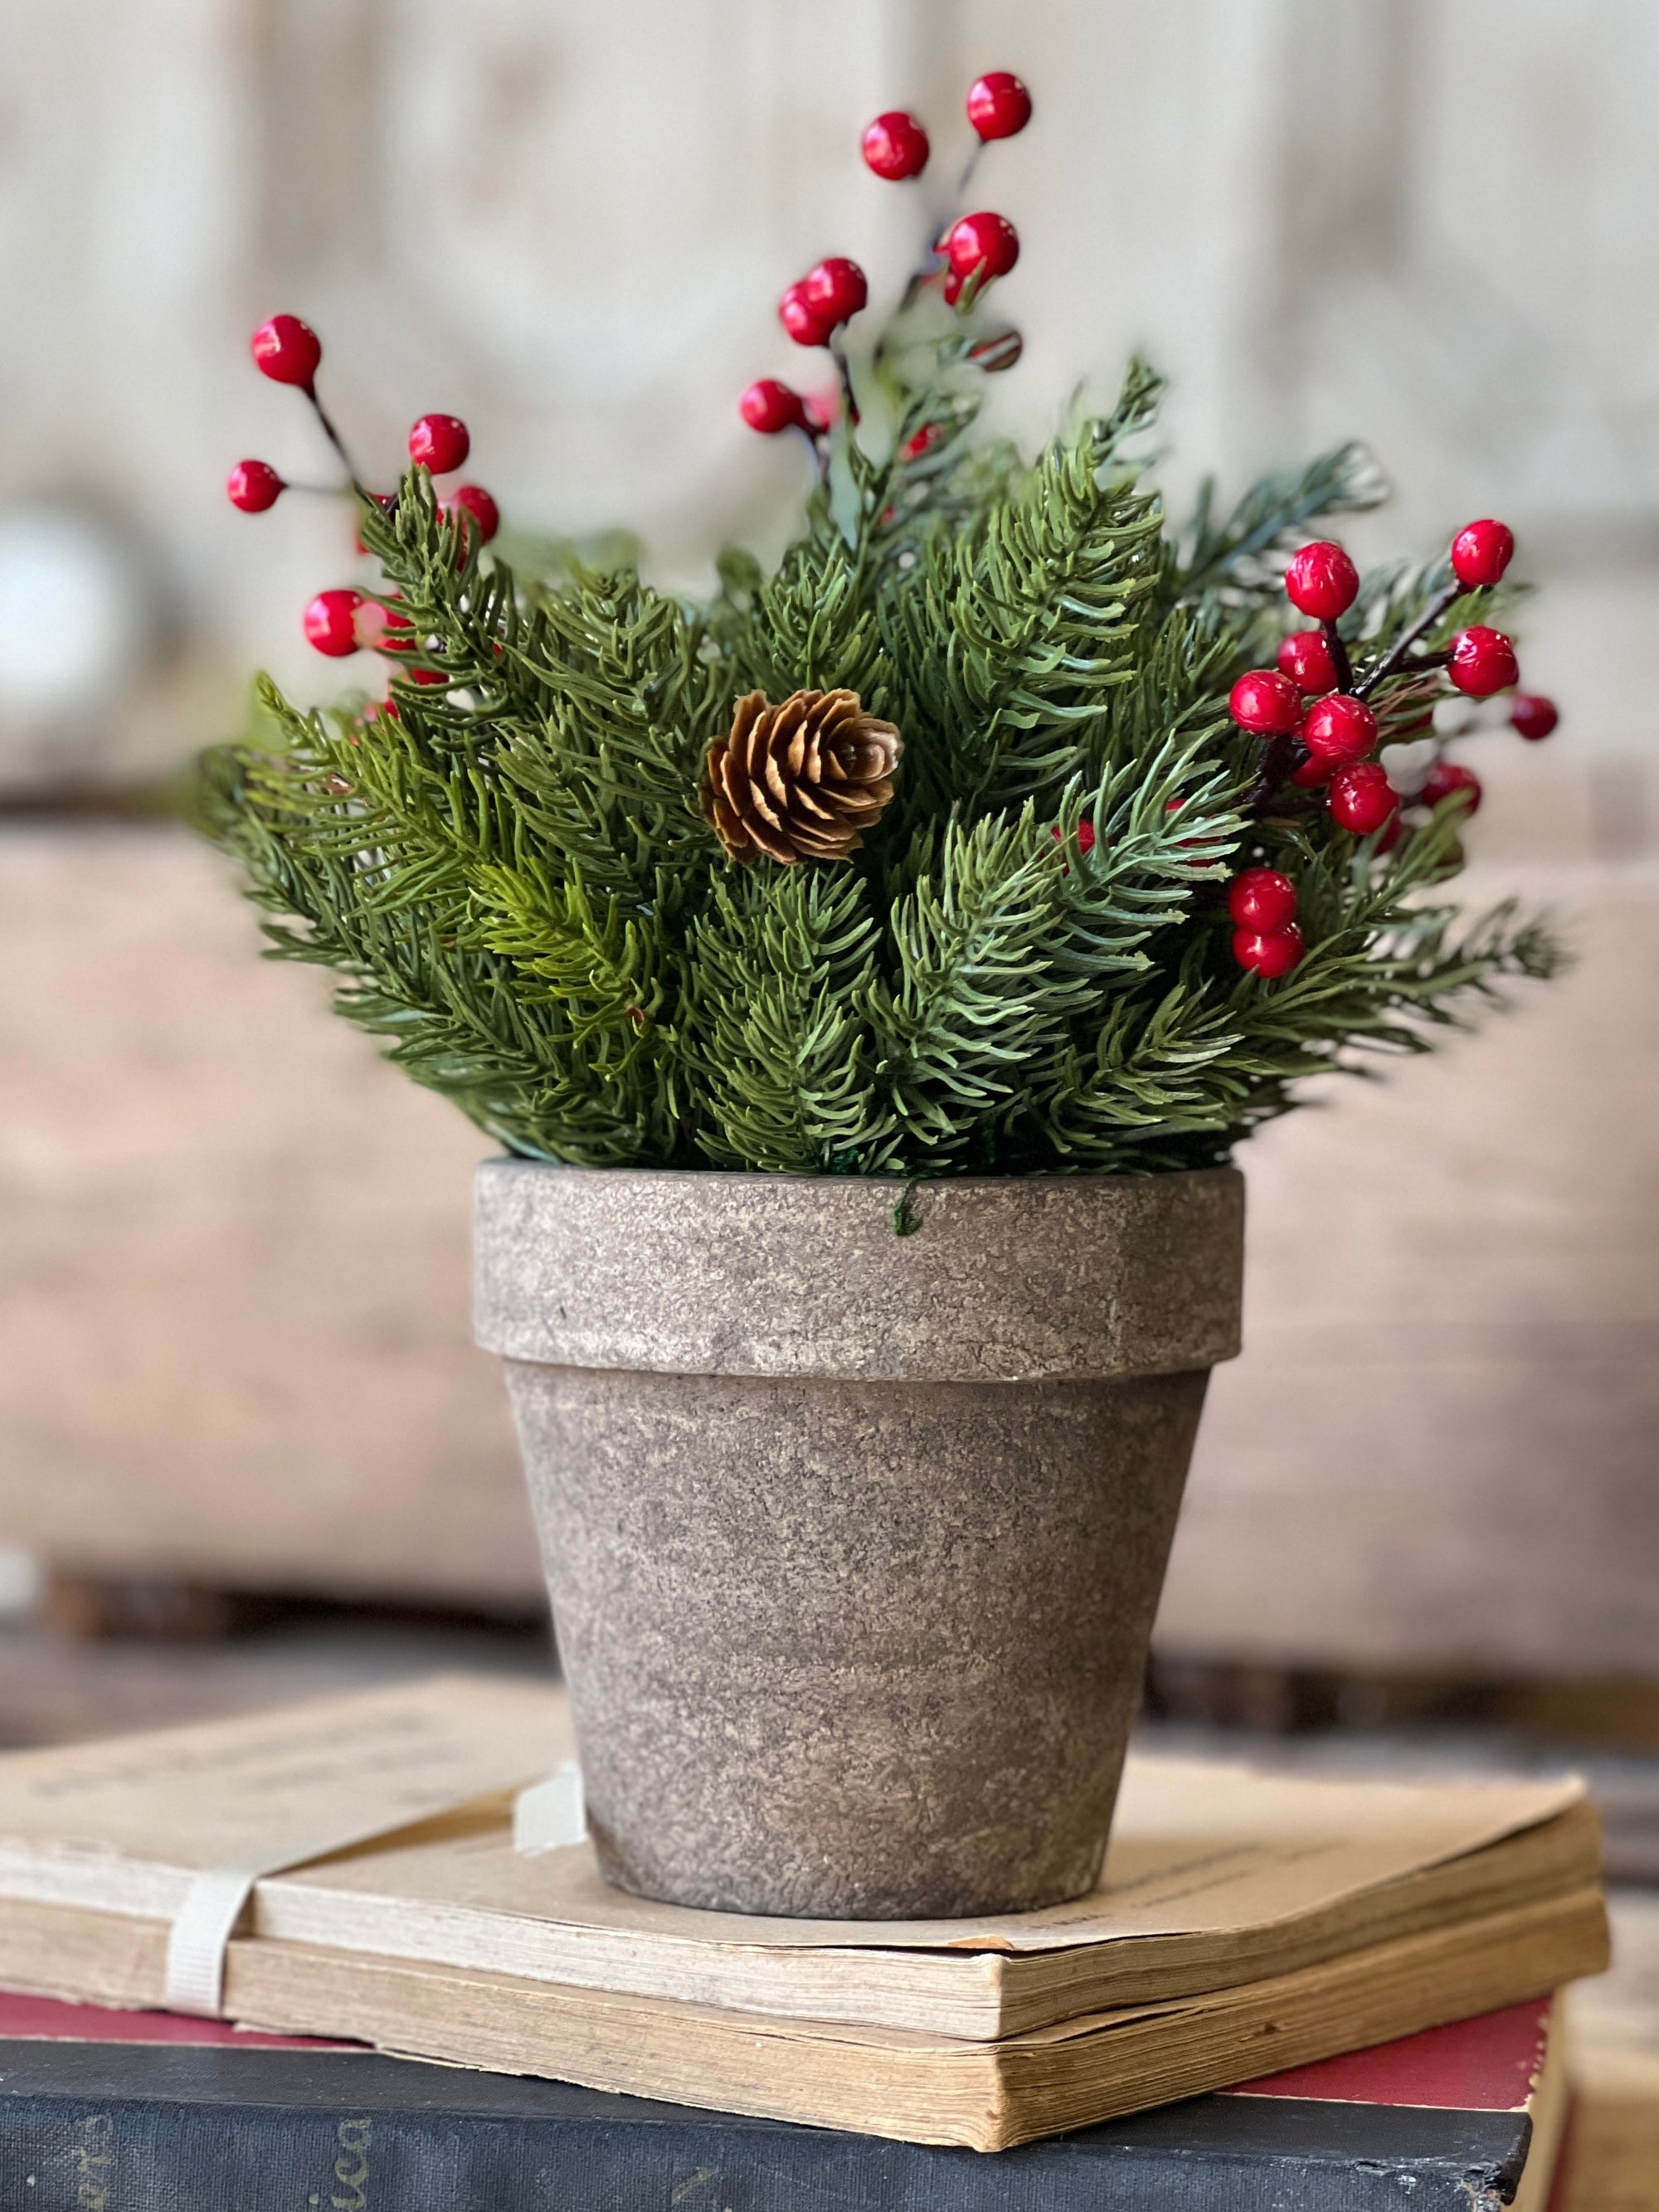 Potted White Spruce with Berries